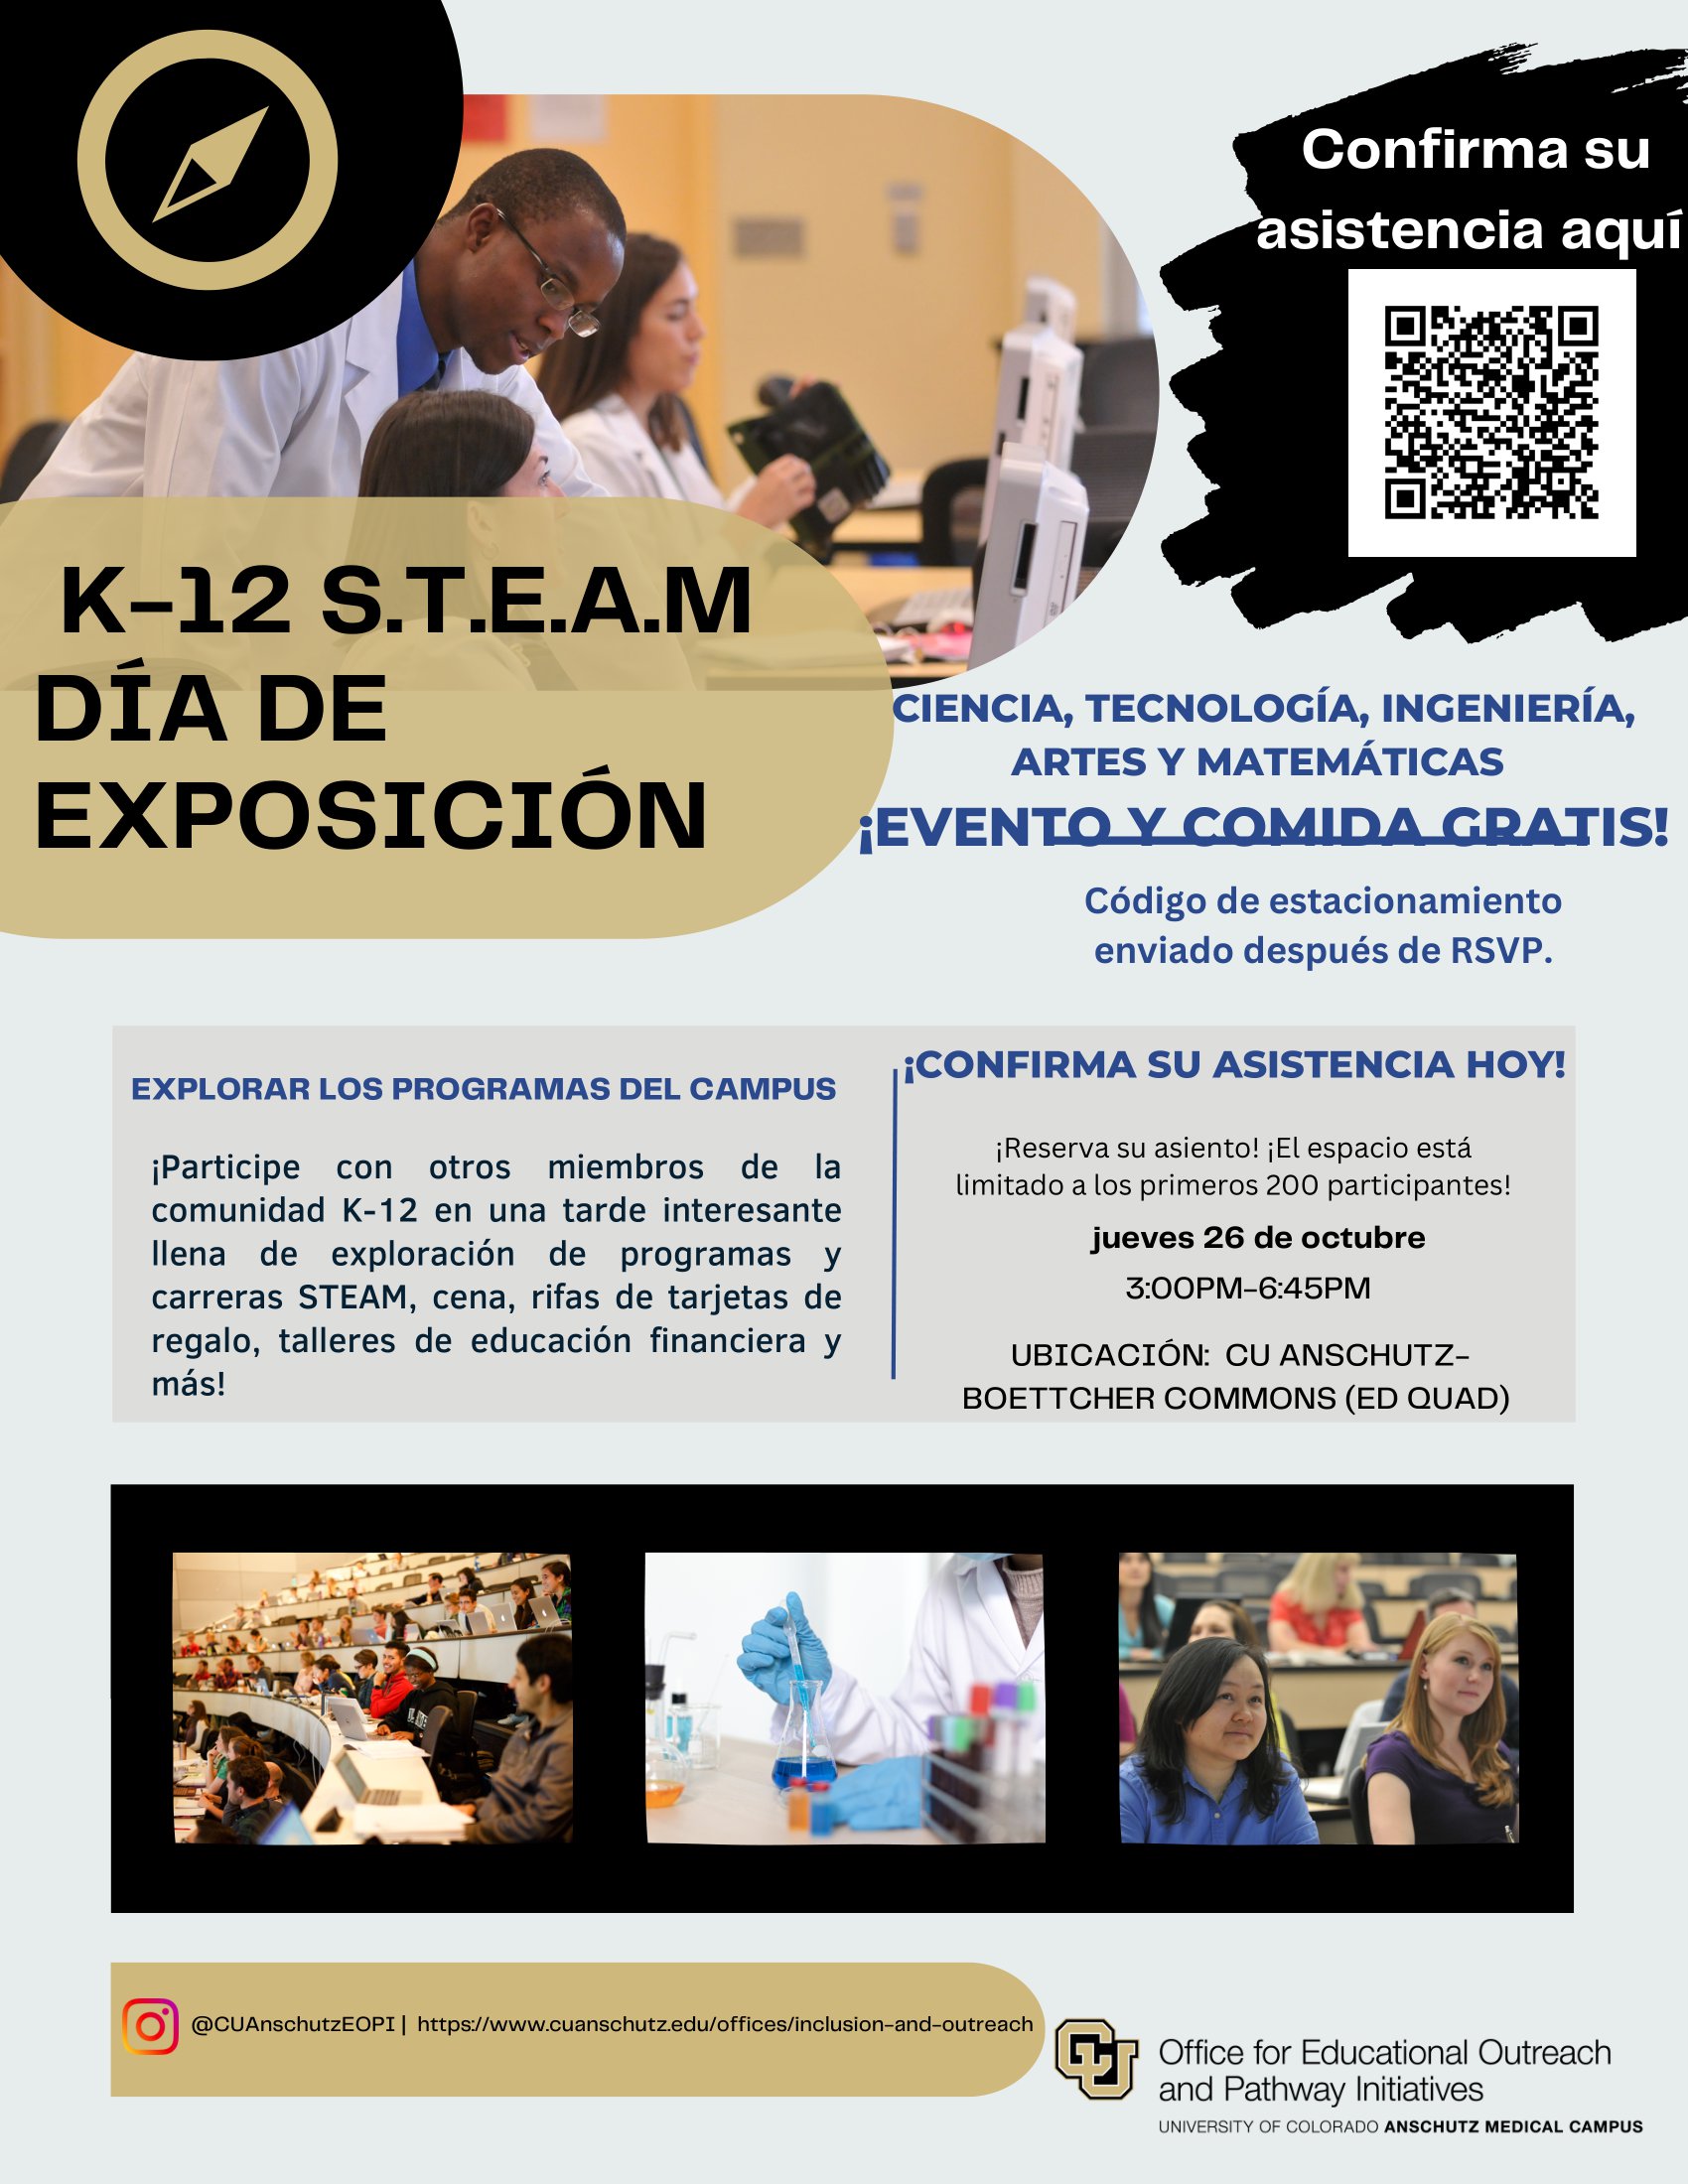 _K-12 S.T.E.A.M Exposure Day-(Spanish)